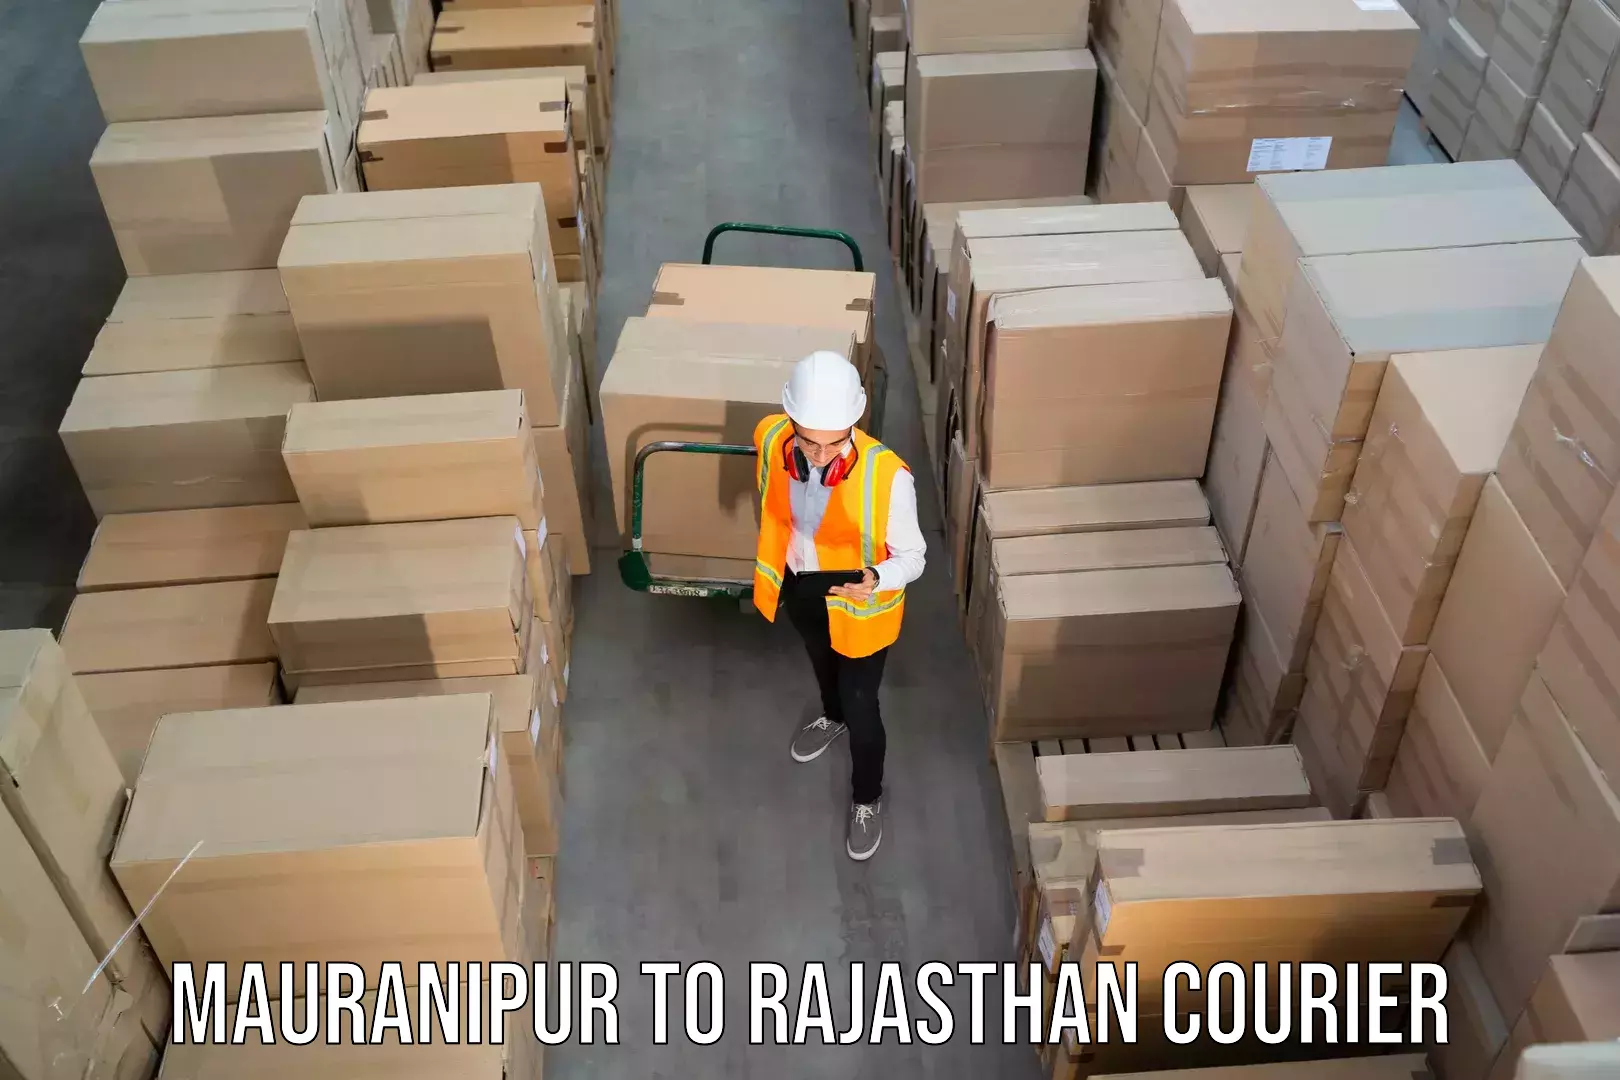 State-of-the-art courier technology Mauranipur to Weir